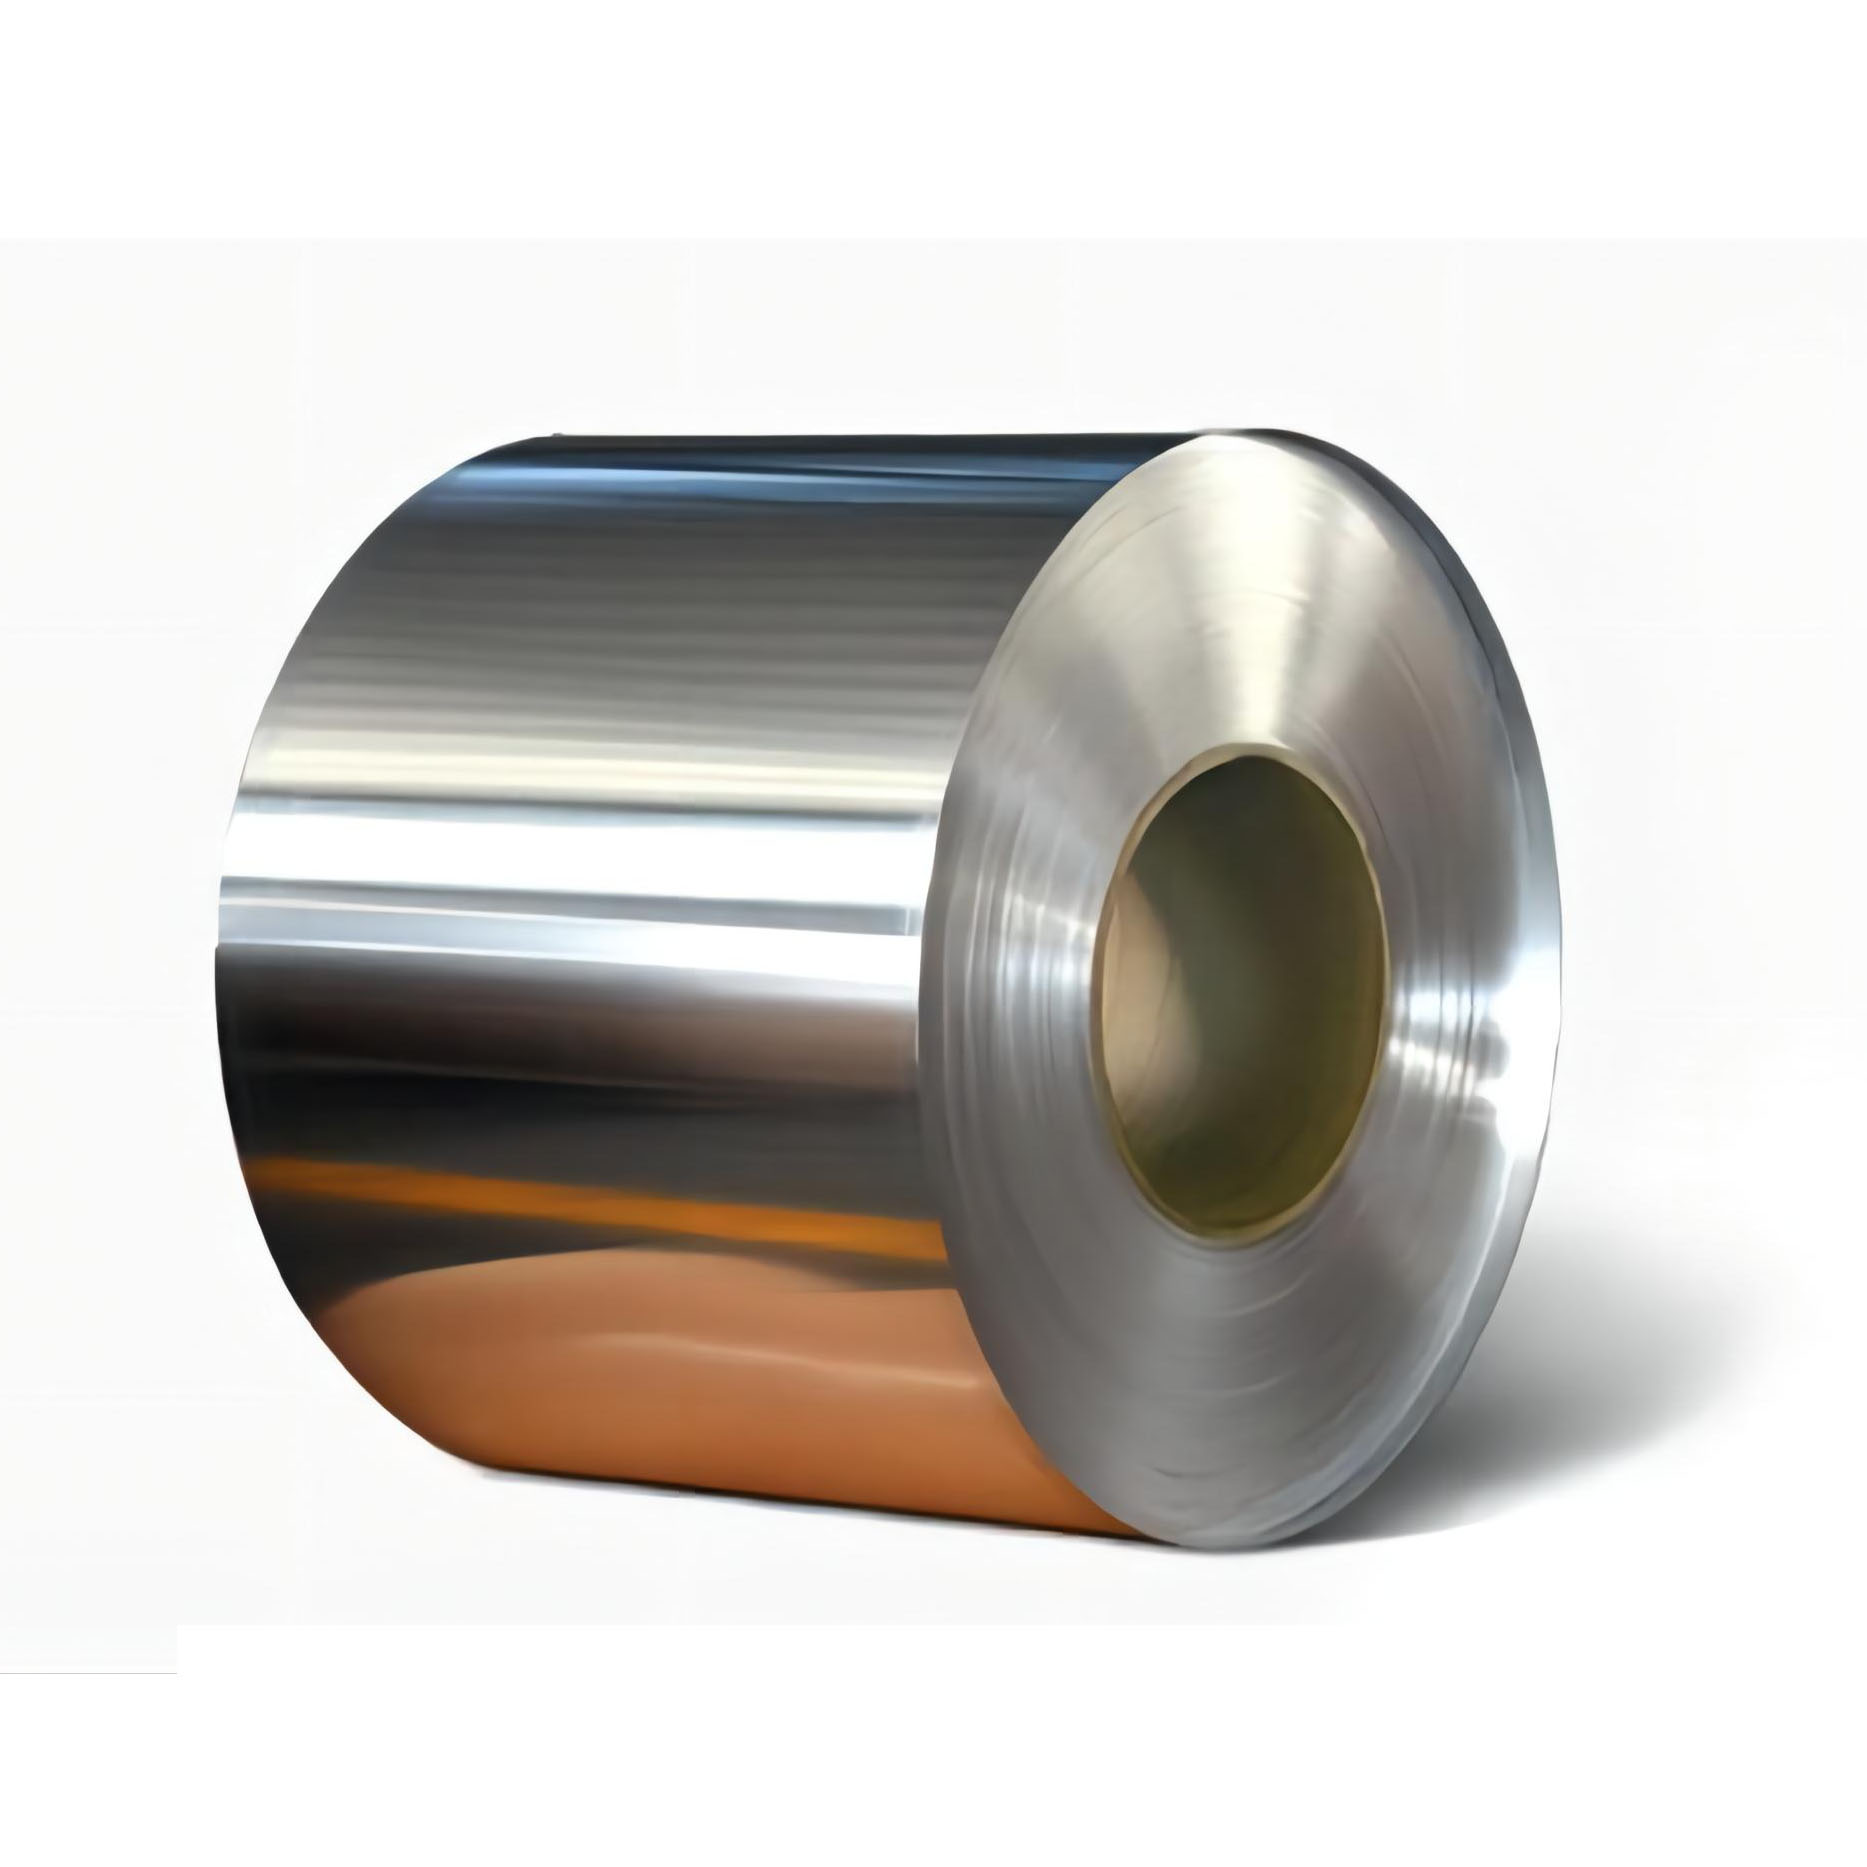 2022 Latest Design 3003 Prepainted Aluminum Coil - High Quality 3003 Aluminum Coil Made In China – Yutwin